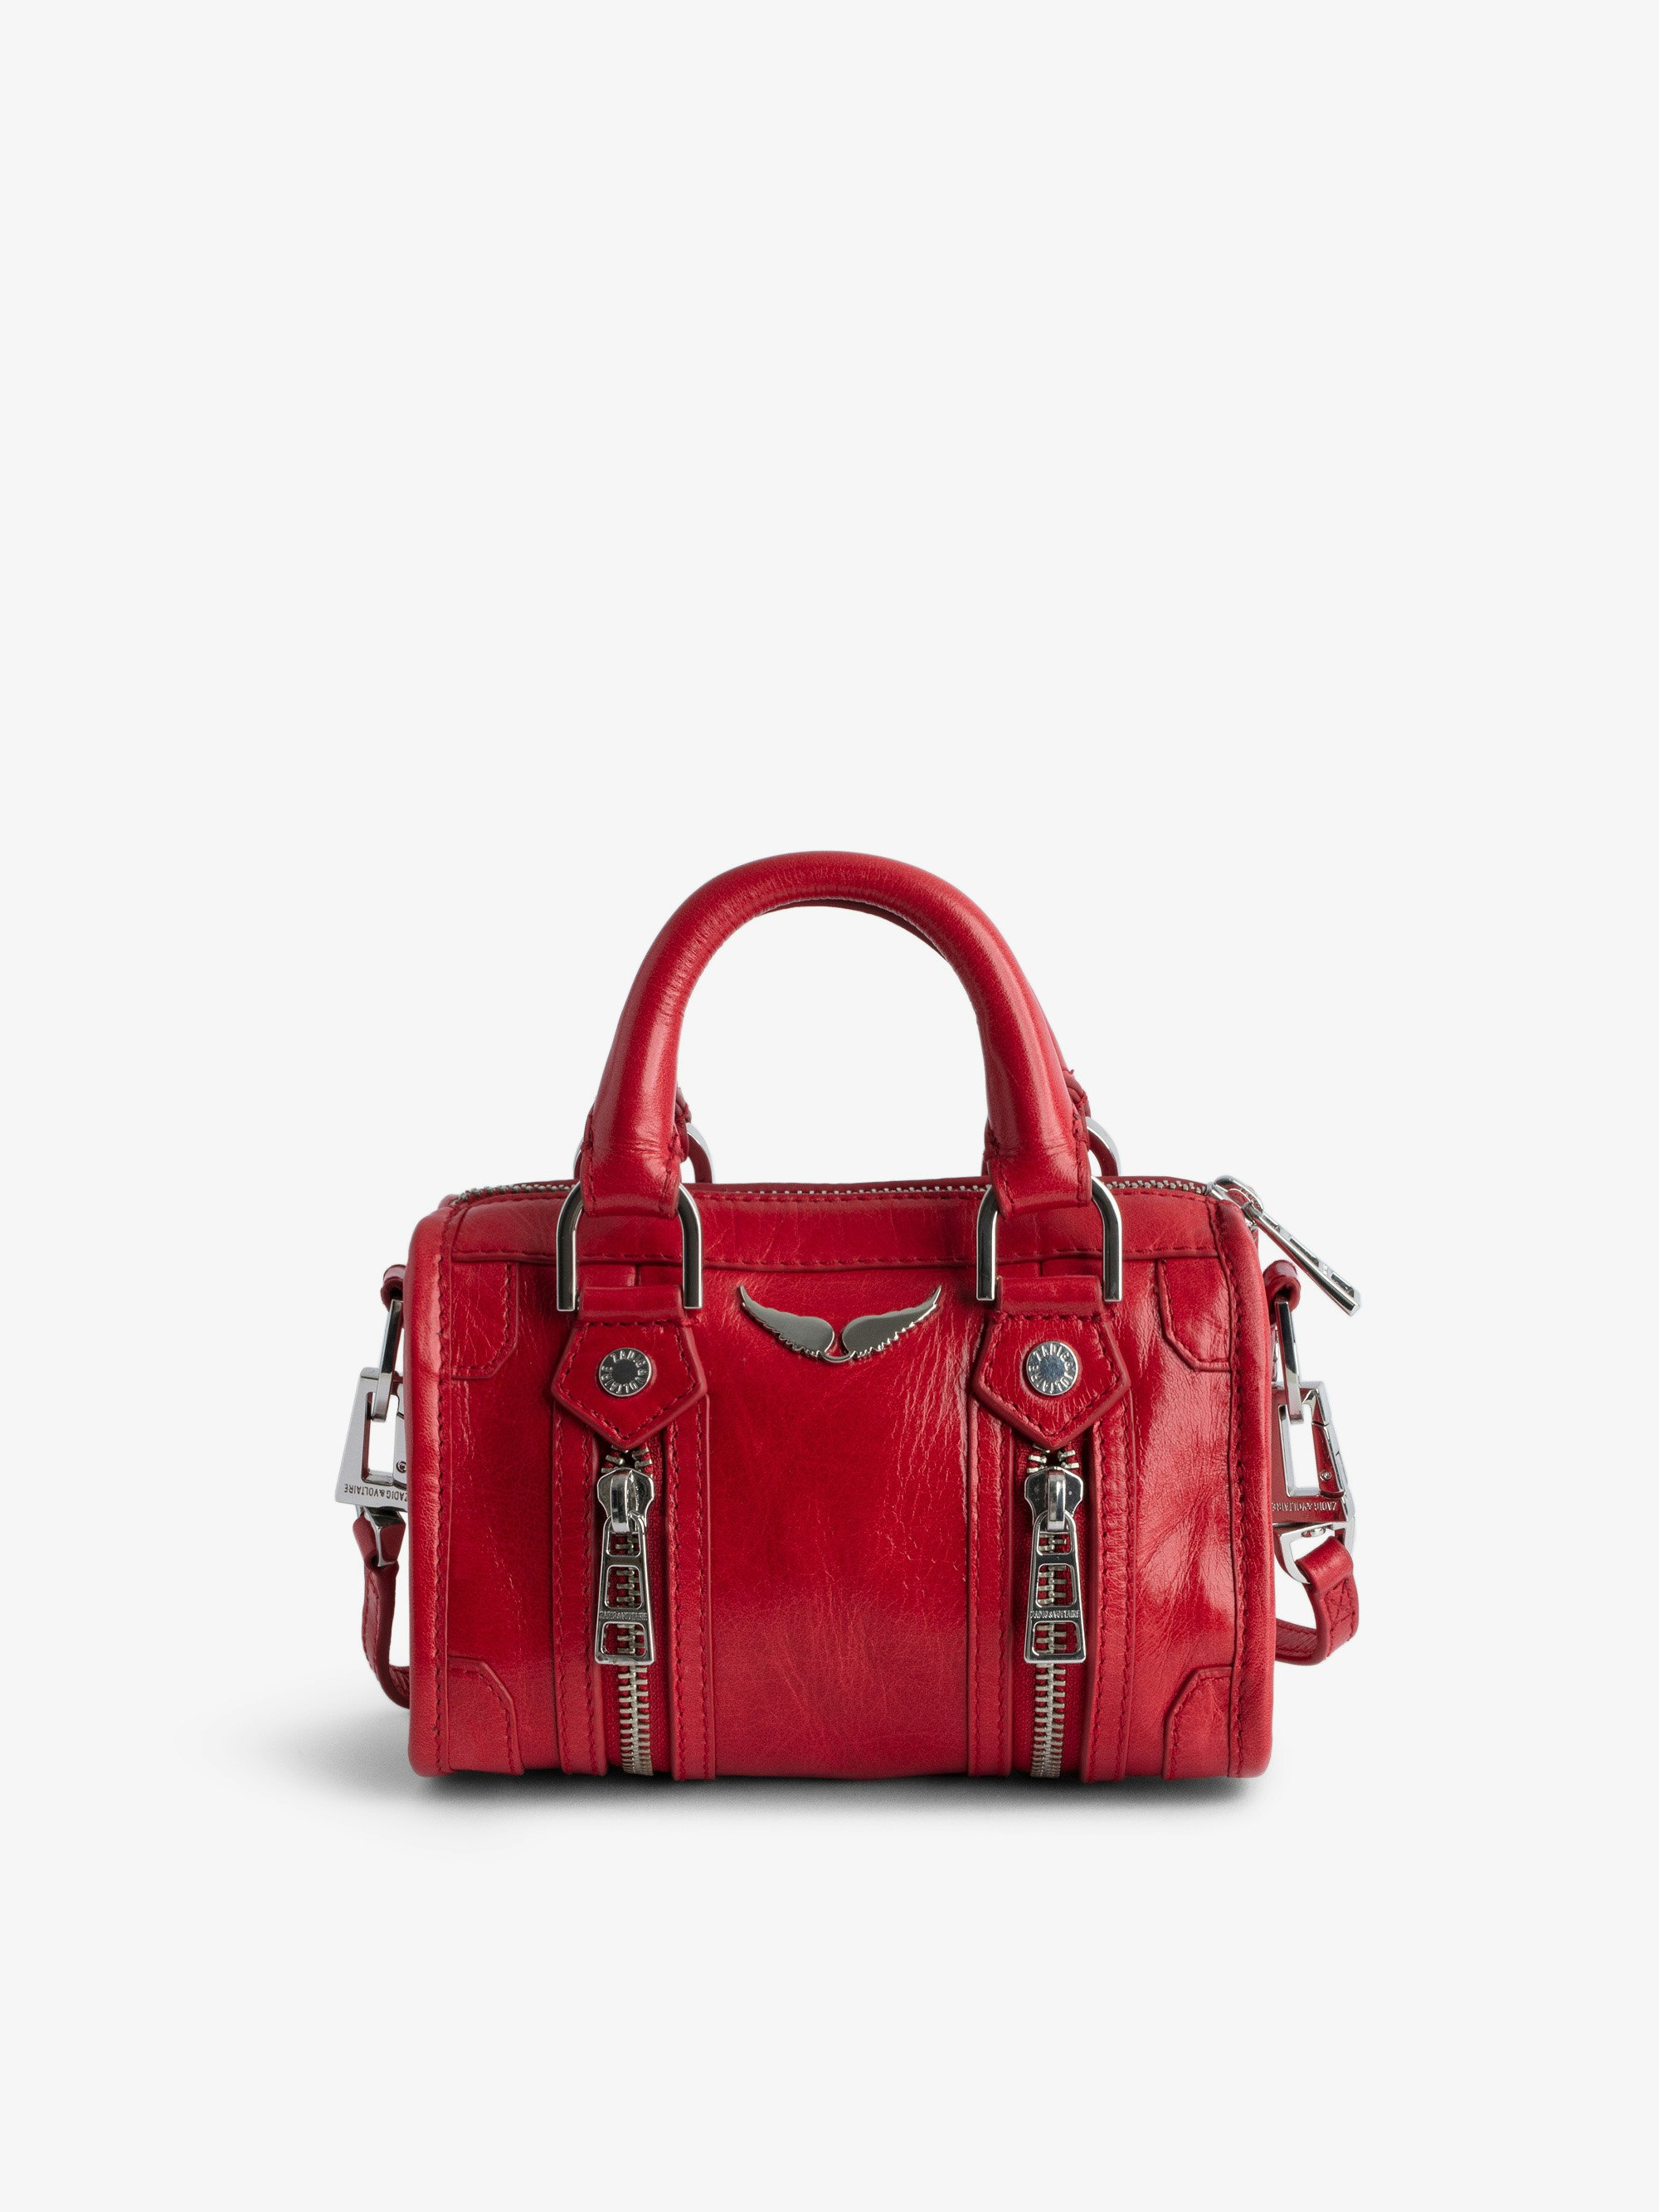 Sunny Nano #2 Bag - Small red vintage-effect patent leather bag with short handles and shoulder strap.